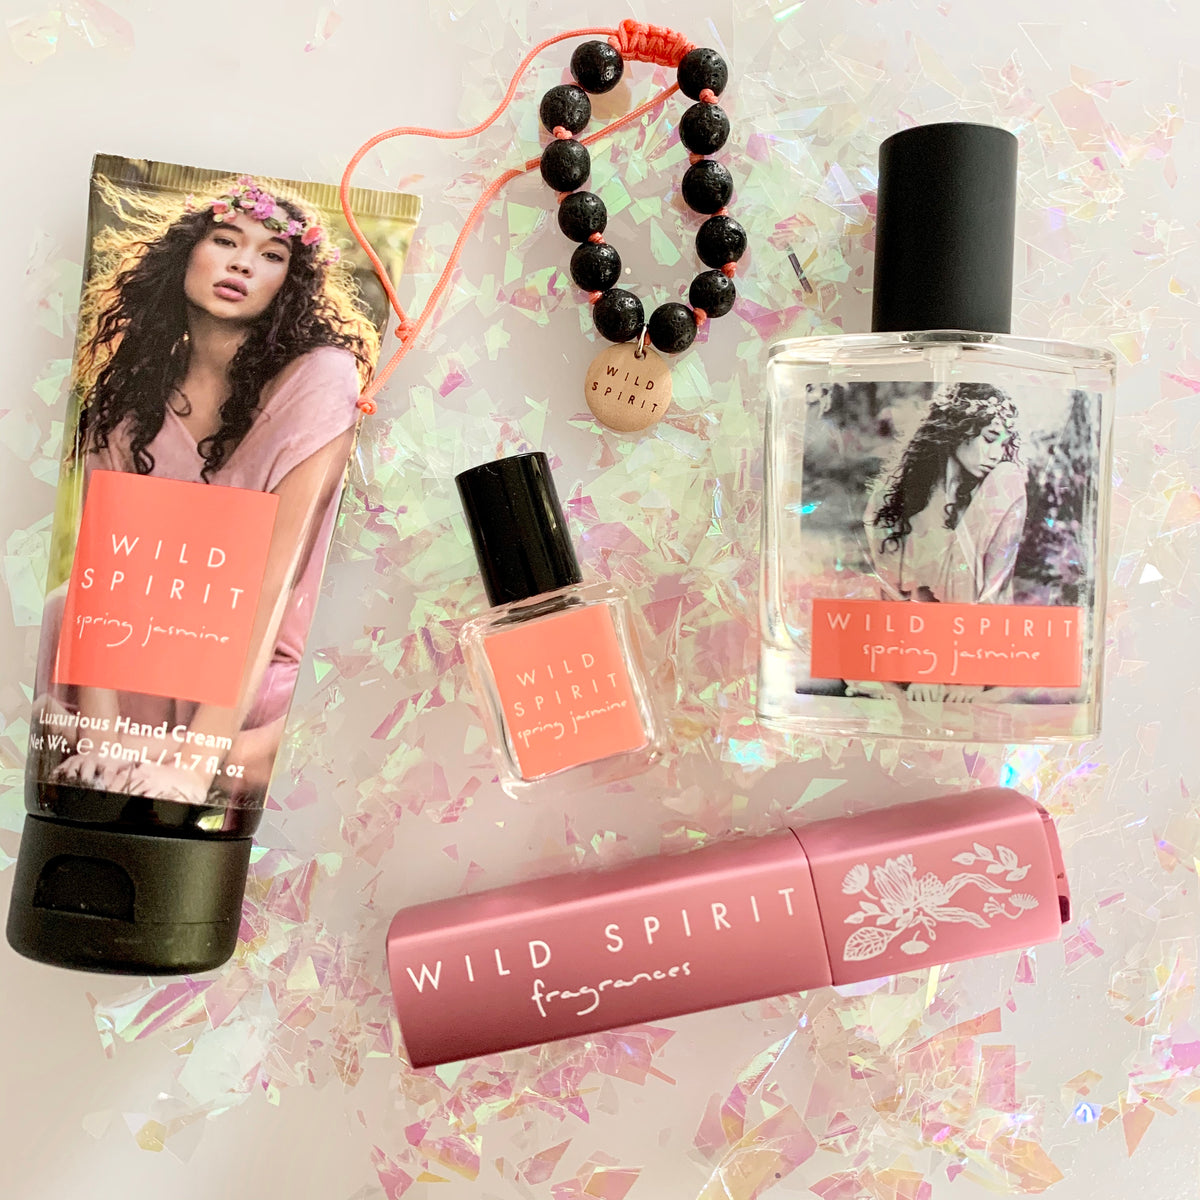 The Spring Jasmine Lovers Perfume Gift Set gives you Spring Jasmine goodness whenever and wherever you need a little flirty touch-up. With a petally white floral creation highlighted by a creamy jasmine signature and enhanced with specialty tea notes, Spring Jasmine is a delicate floral yet fresh scent.